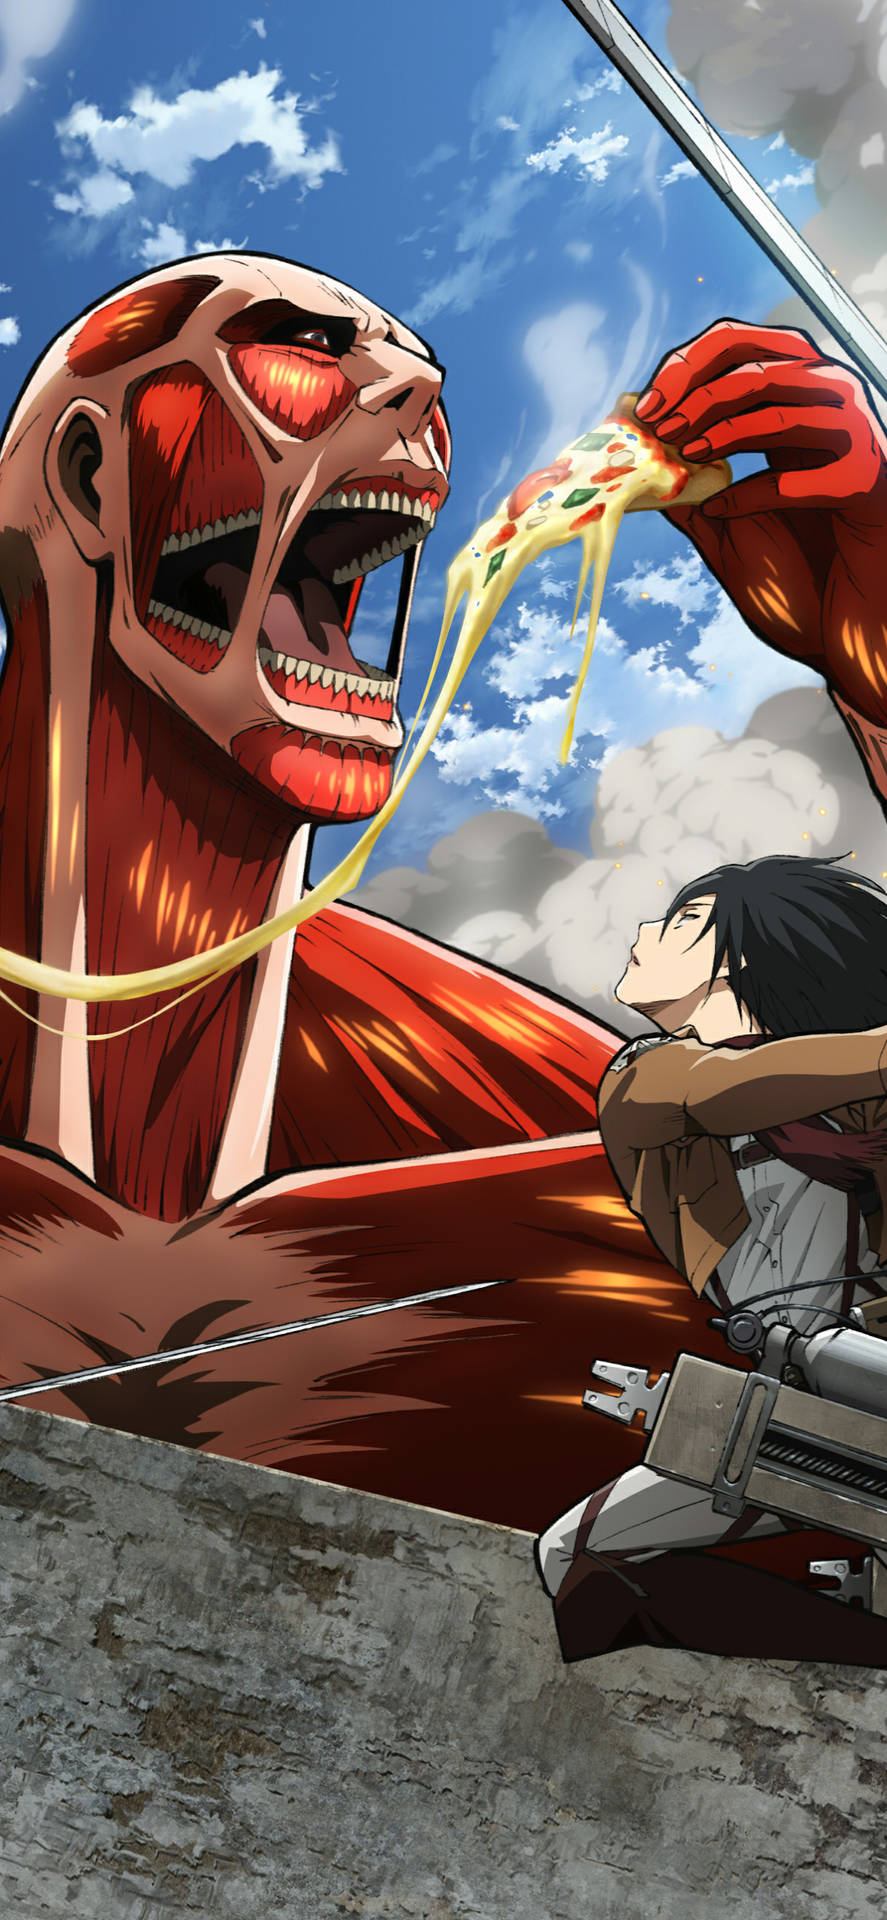 Colossal Eating Pizza Attack On Titan Iphone